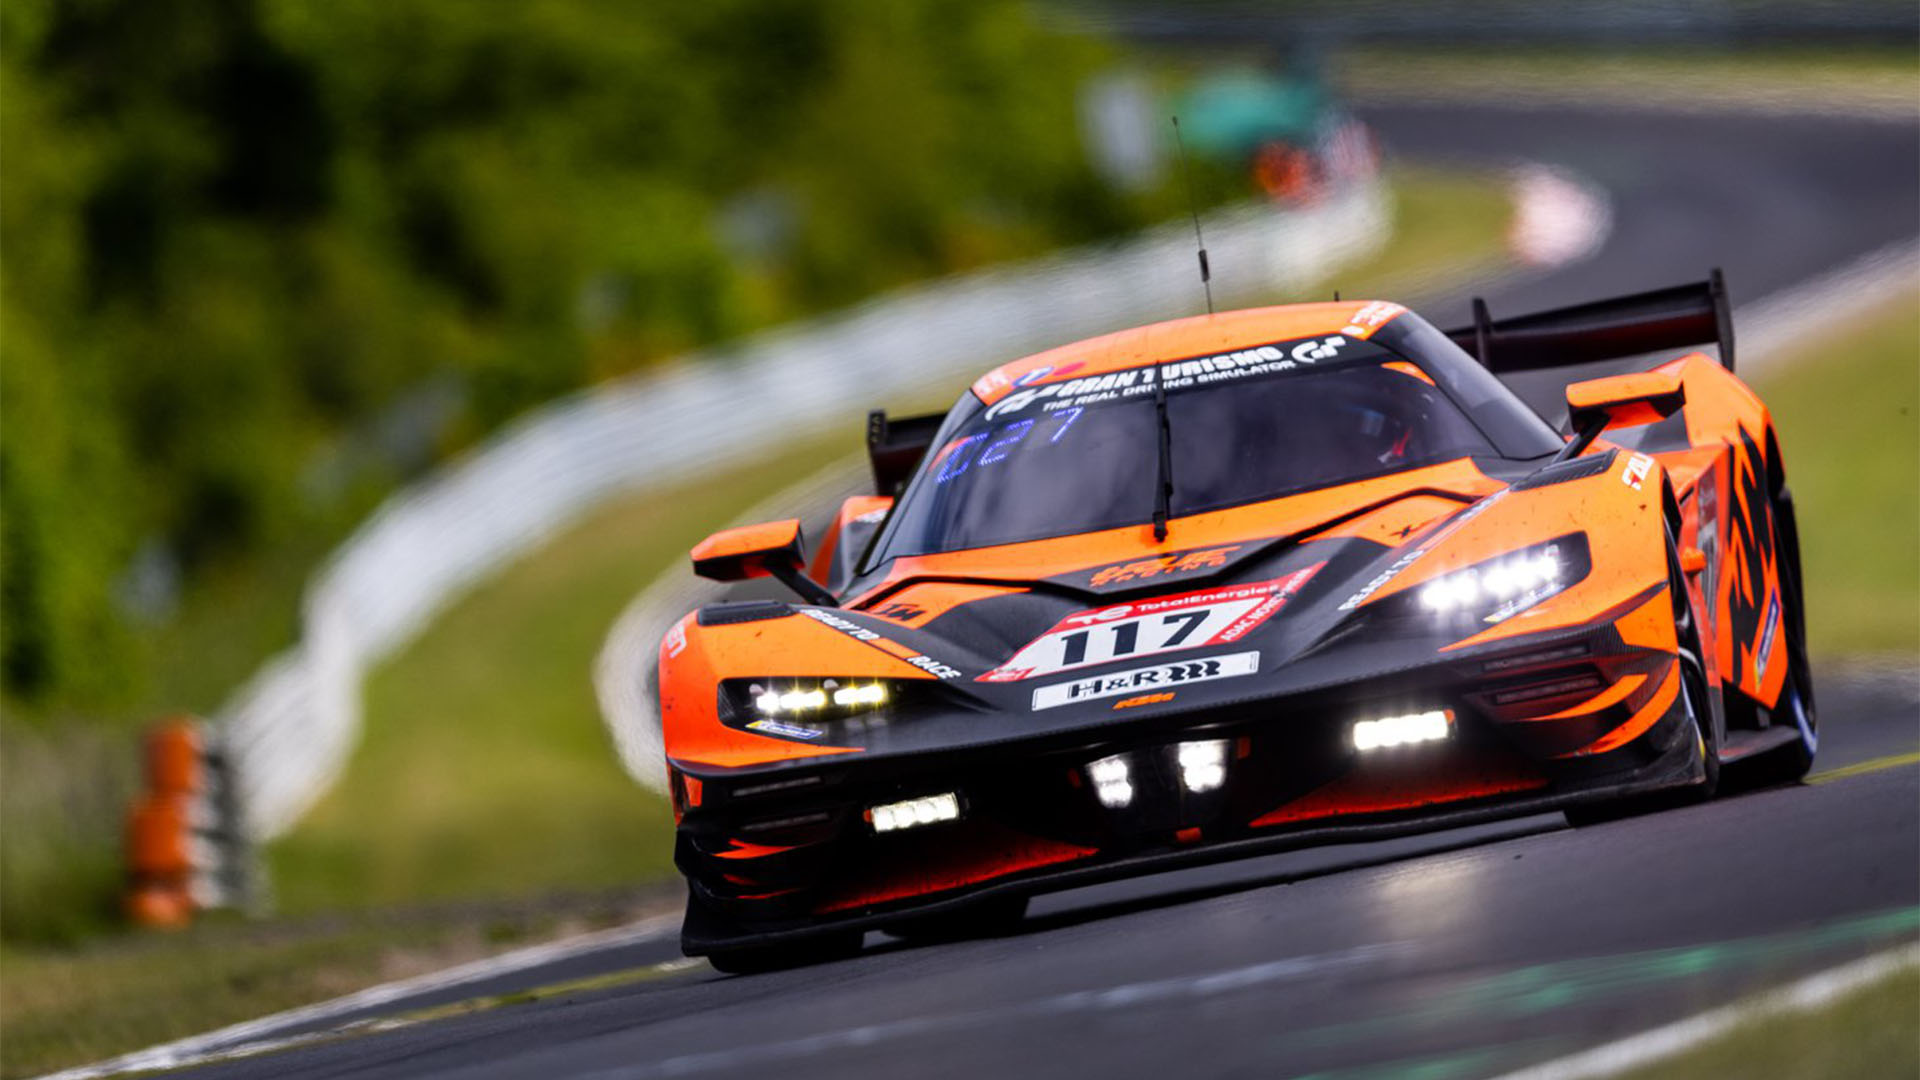 The Ktm Of The Gt2 Is Called The X-Bow Gtx, And It Competes In The Second Division Of Gran Turismo Cars.